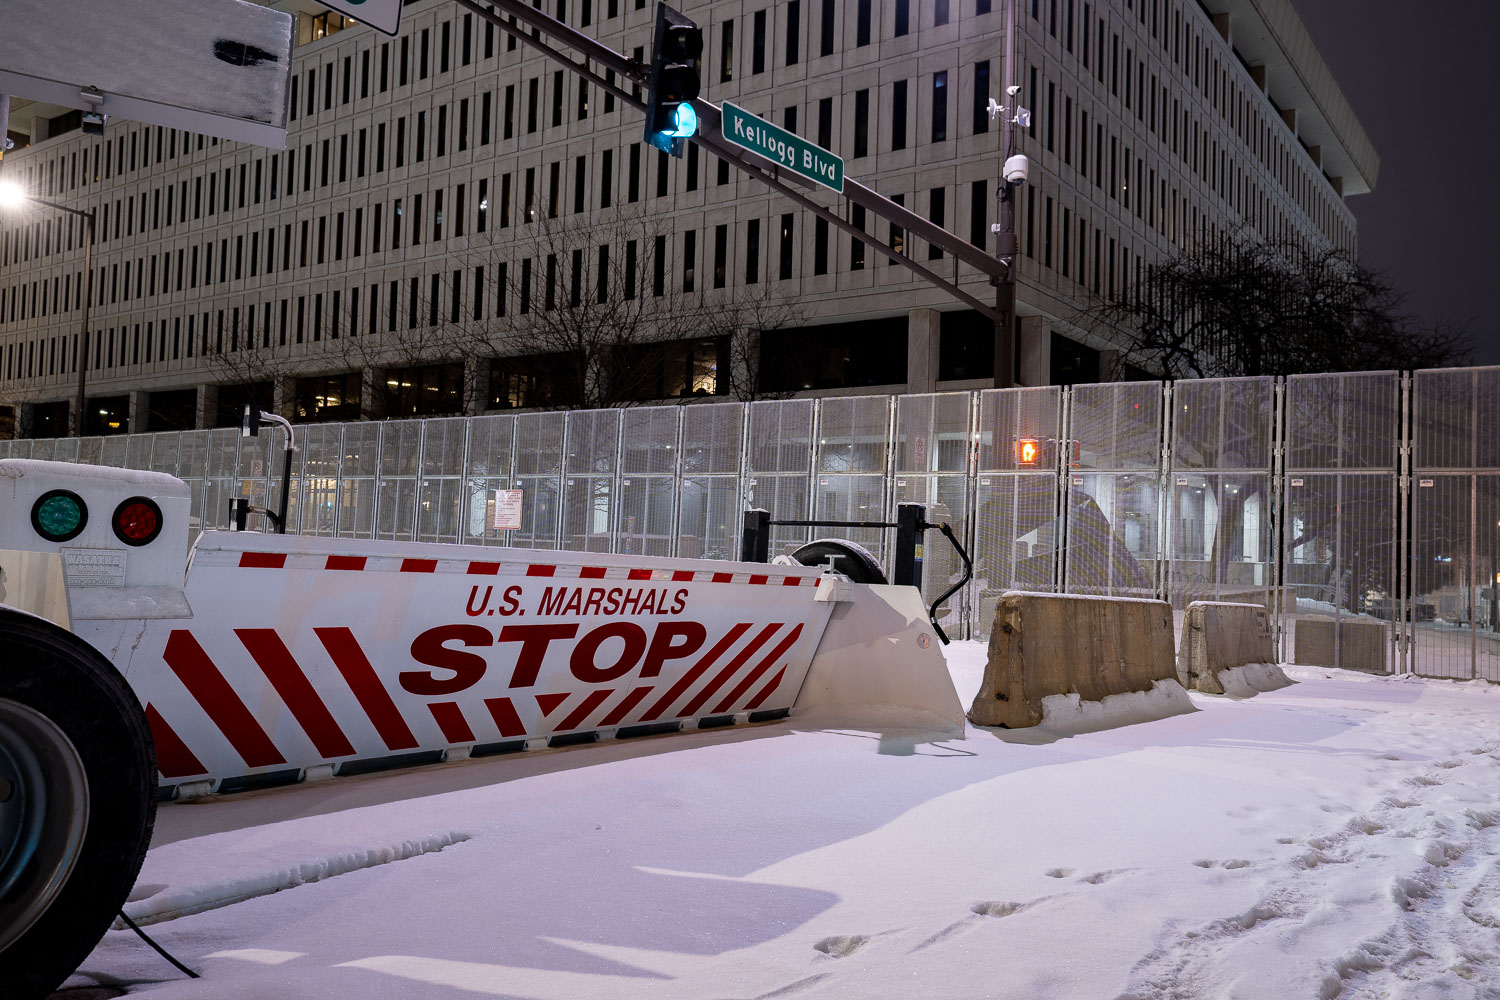 Security around the Warren E. Burger Federal Building in downtown St. Paul the night before opening statements in the federal trial of the officers accused of violating George Floyd's civil rights.